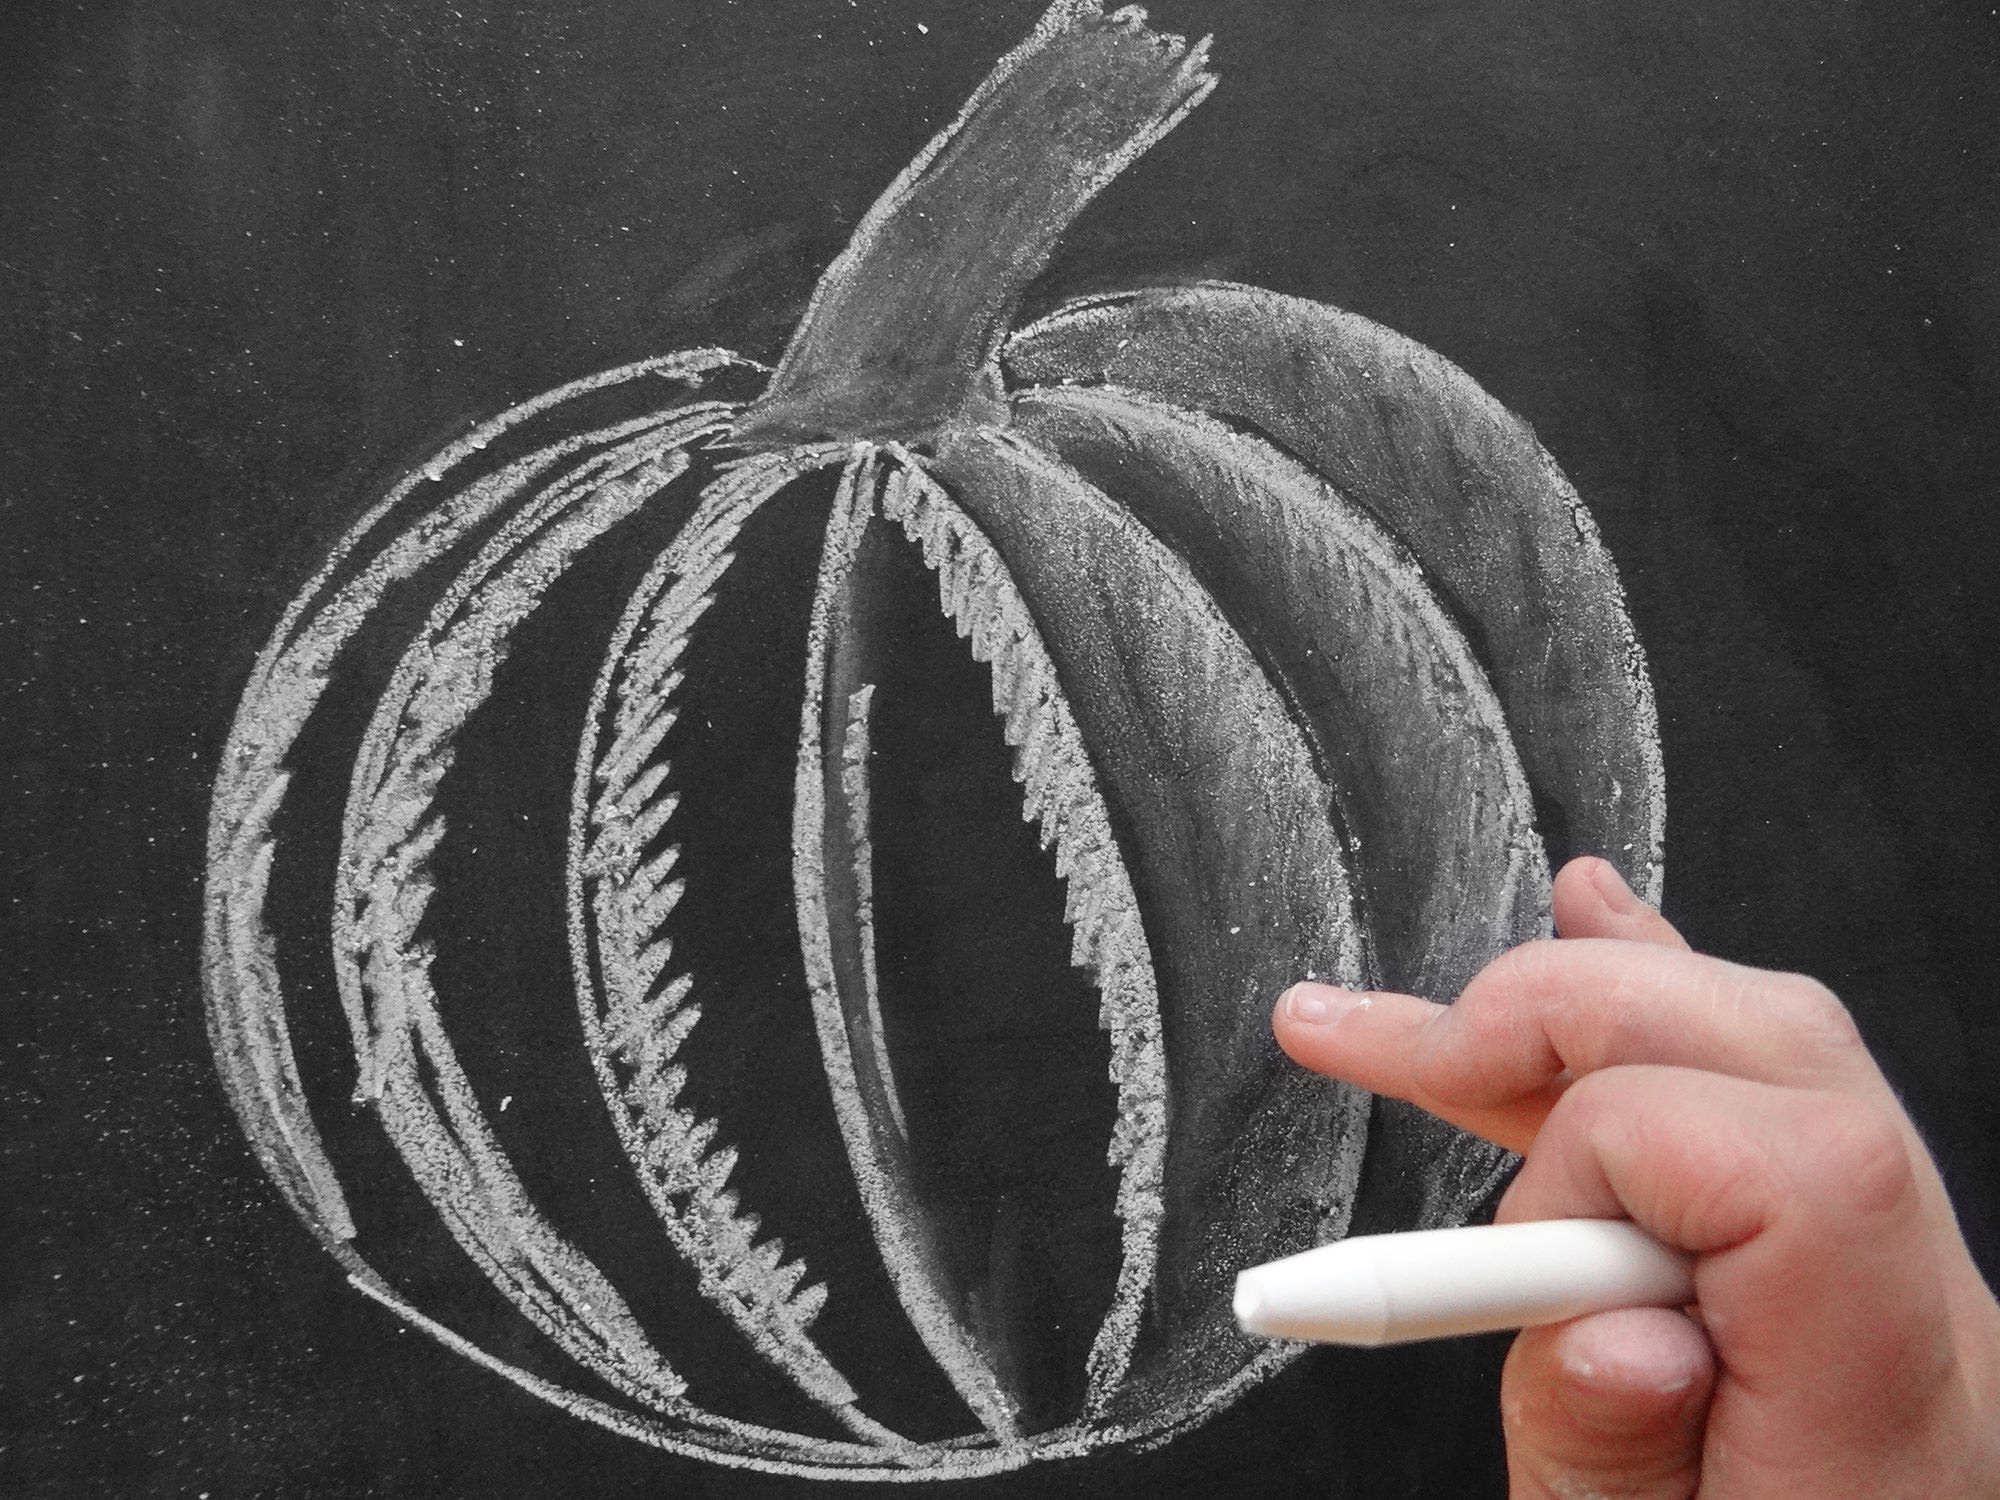 Valerie McKeehan, author of The Complete Book of Chalk Lettering, gives a step-by-step tutorial on how to draw a chalk pumpkin.